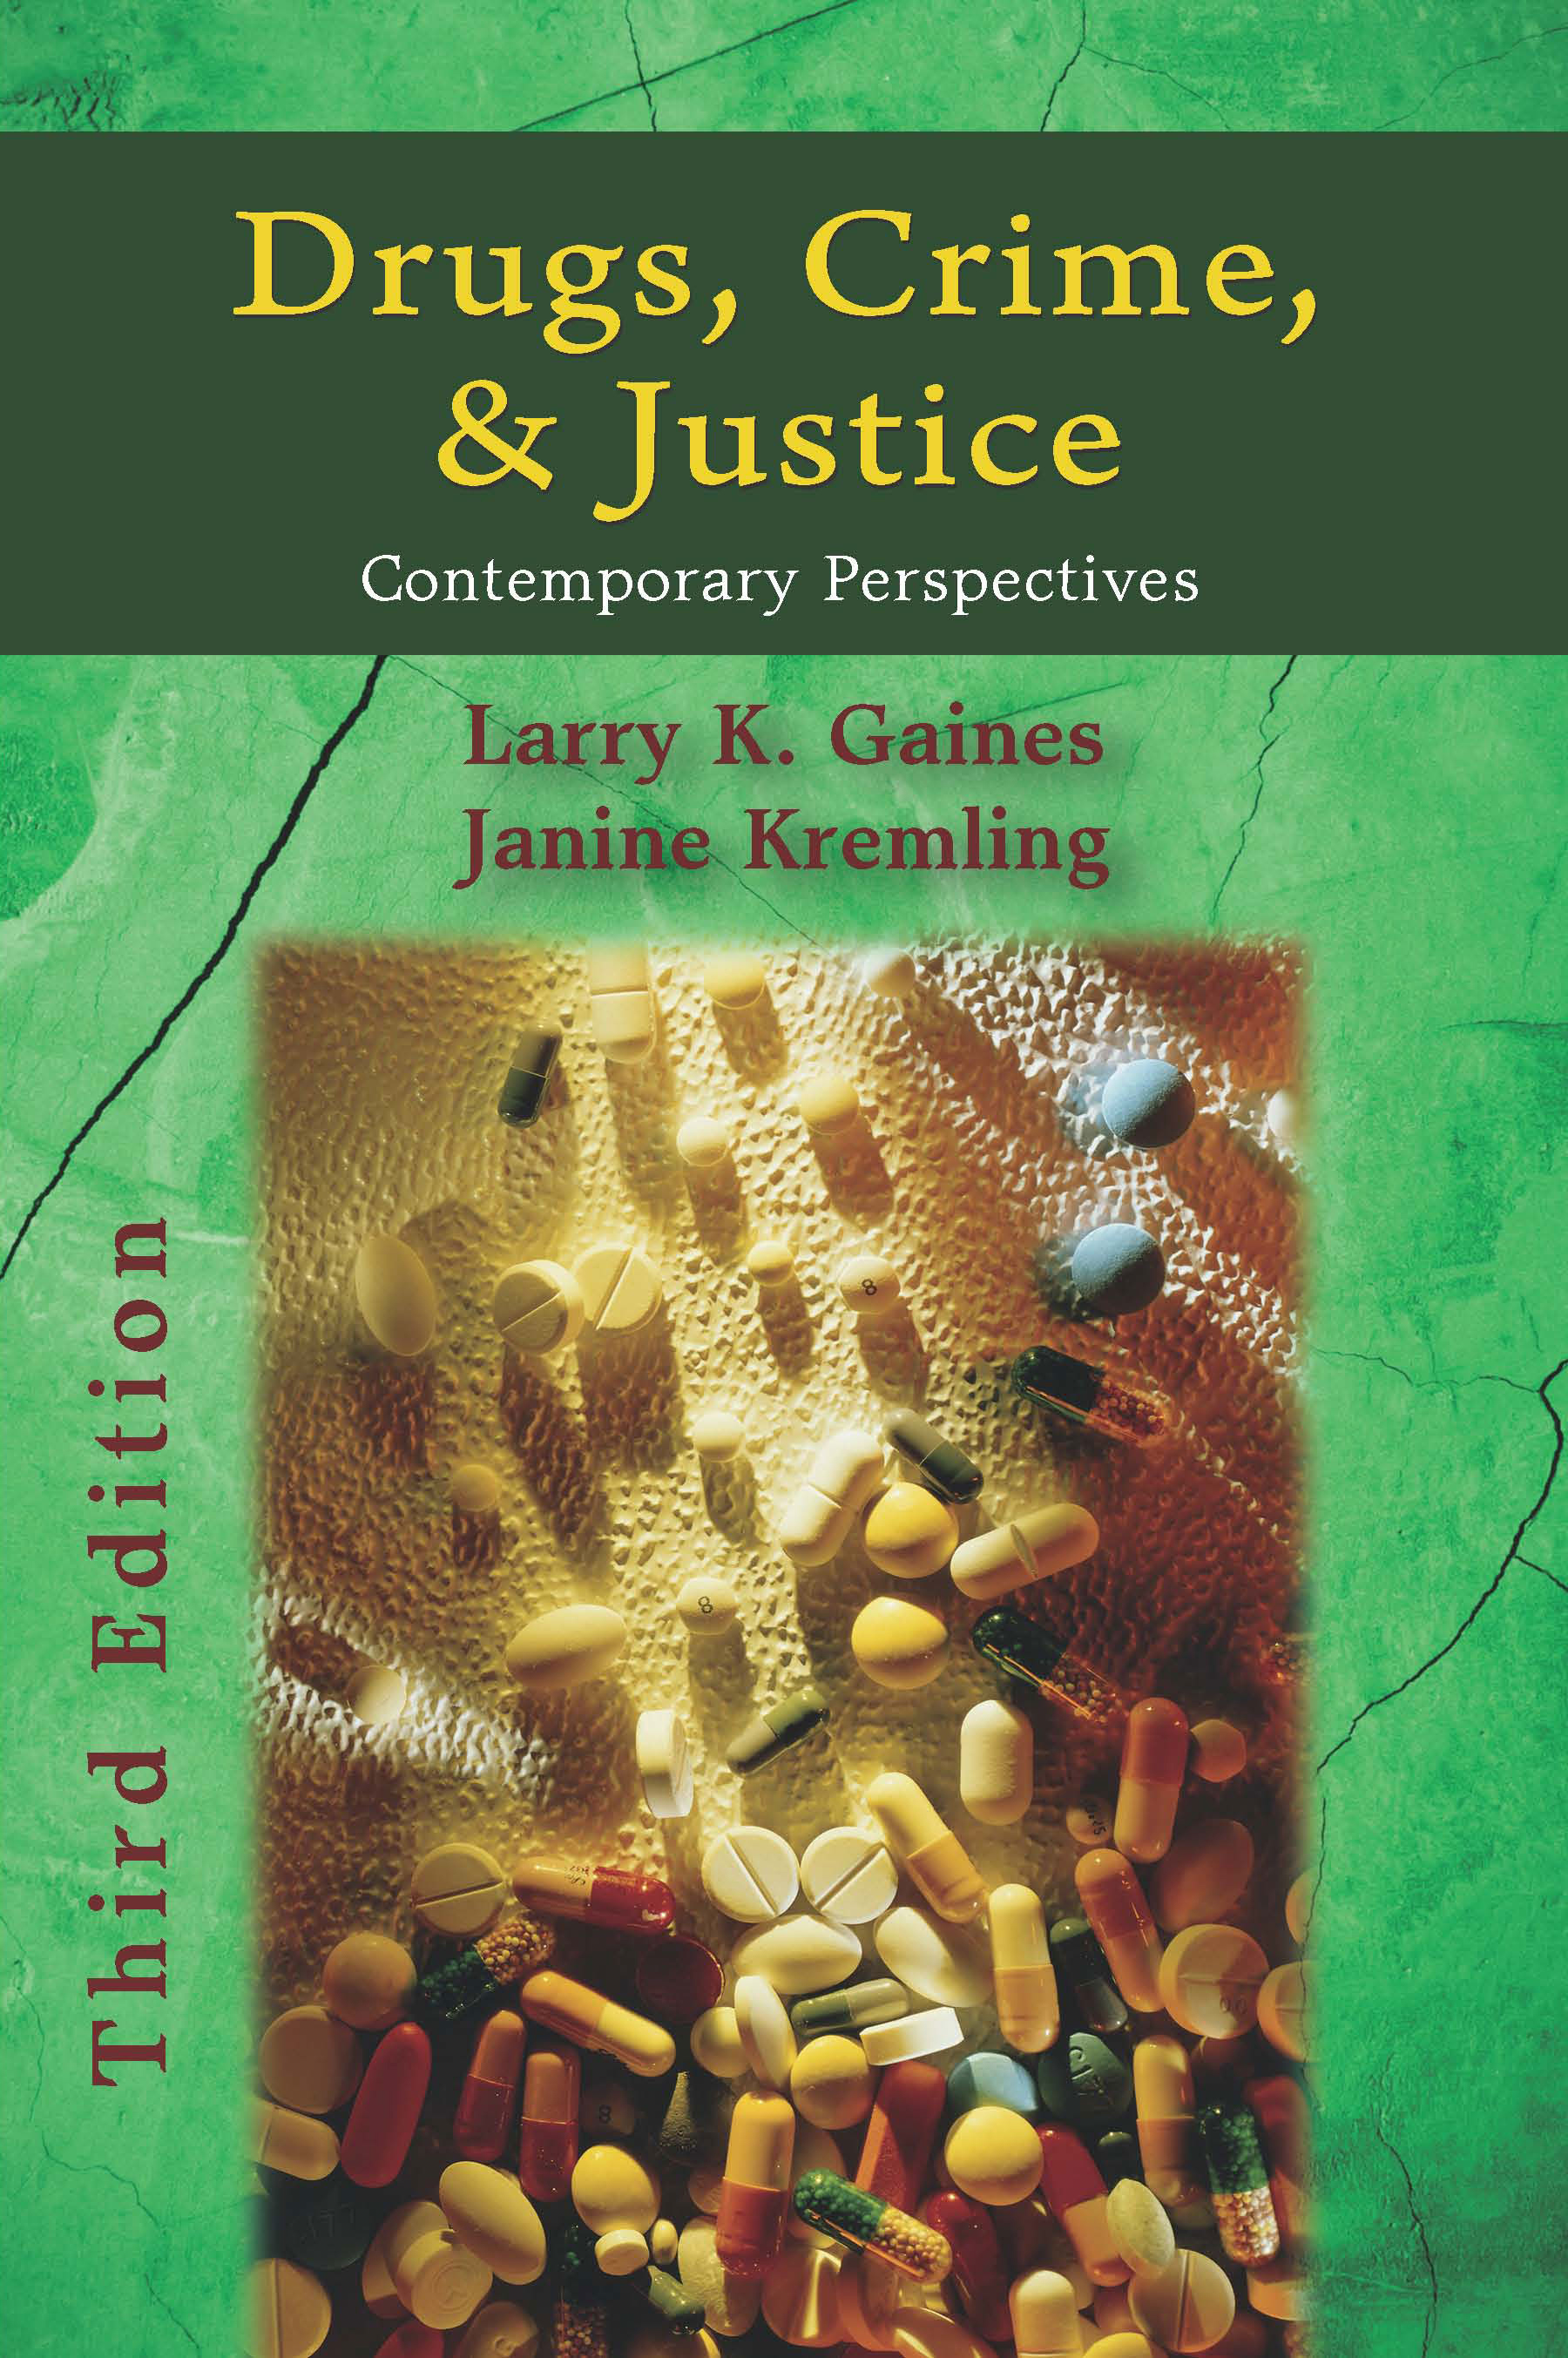 Drugs, Crime, and Justice: Contemporary Perspectives, Third Edition by Larry  Gaines, Janine  Kremling